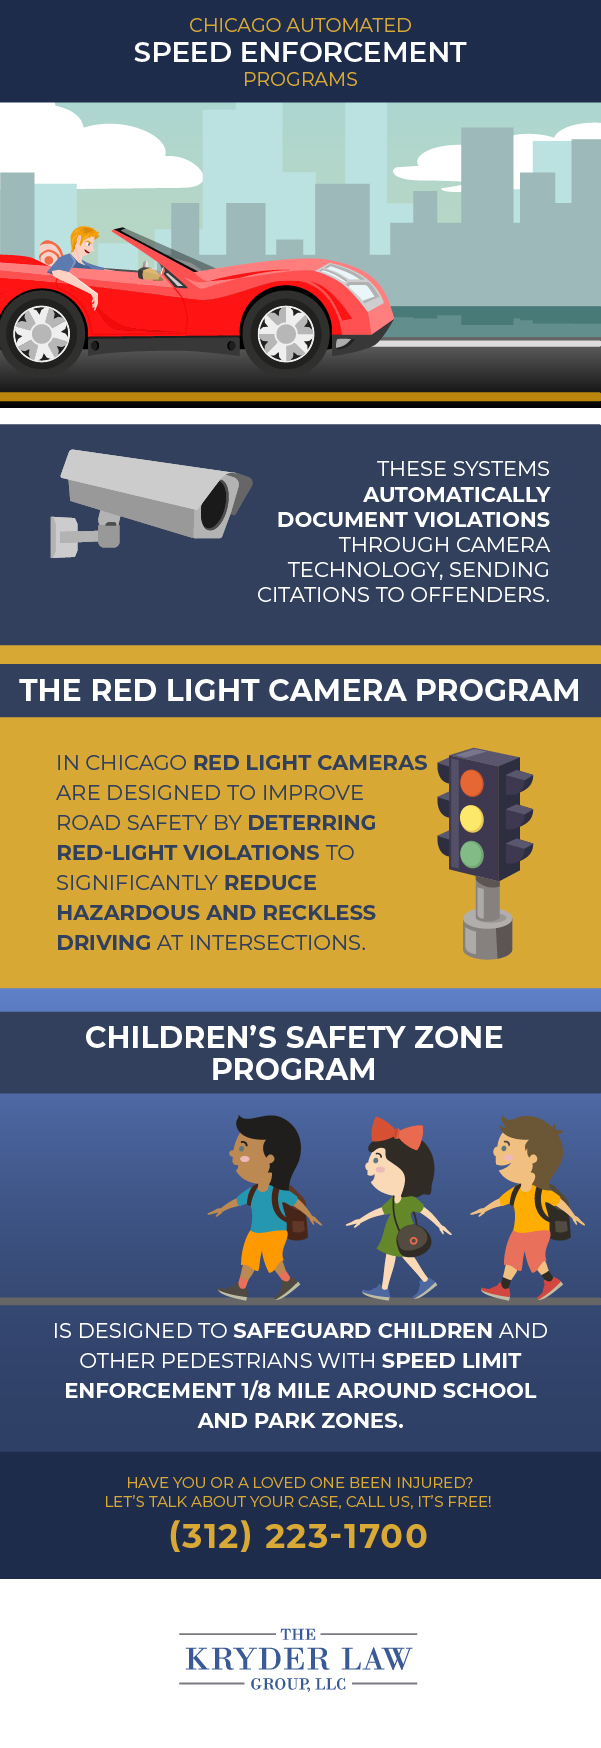 Chicago Automated Speed Enforcement Programs